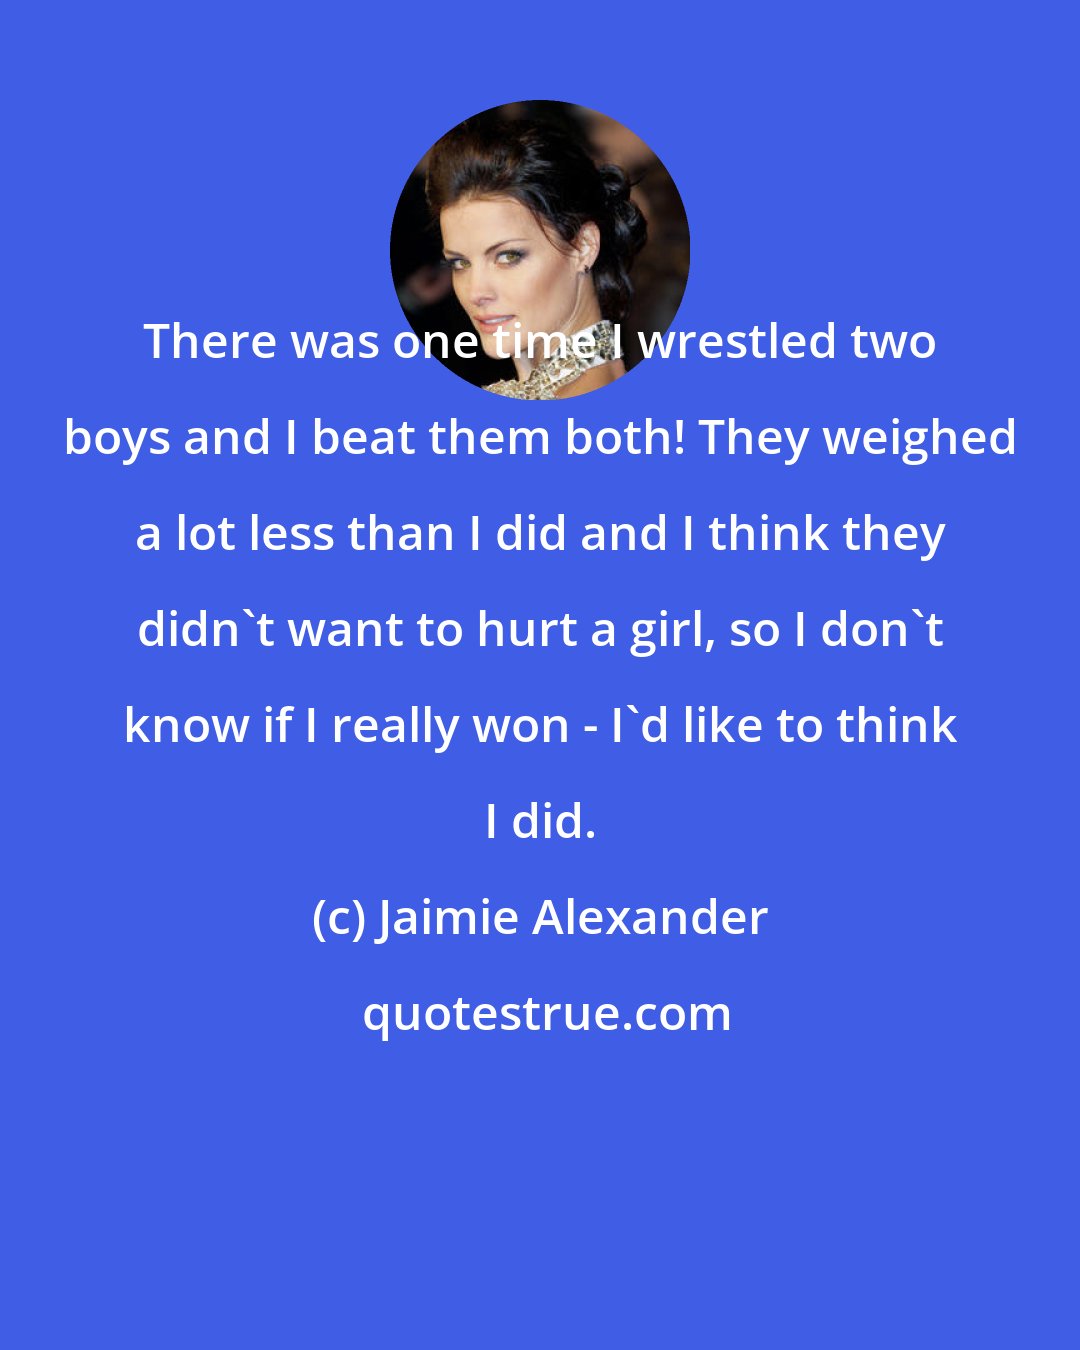 Jaimie Alexander: There was one time I wrestled two boys and I beat them both! They weighed a lot less than I did and I think they didn't want to hurt a girl, so I don't know if I really won - I'd like to think I did.